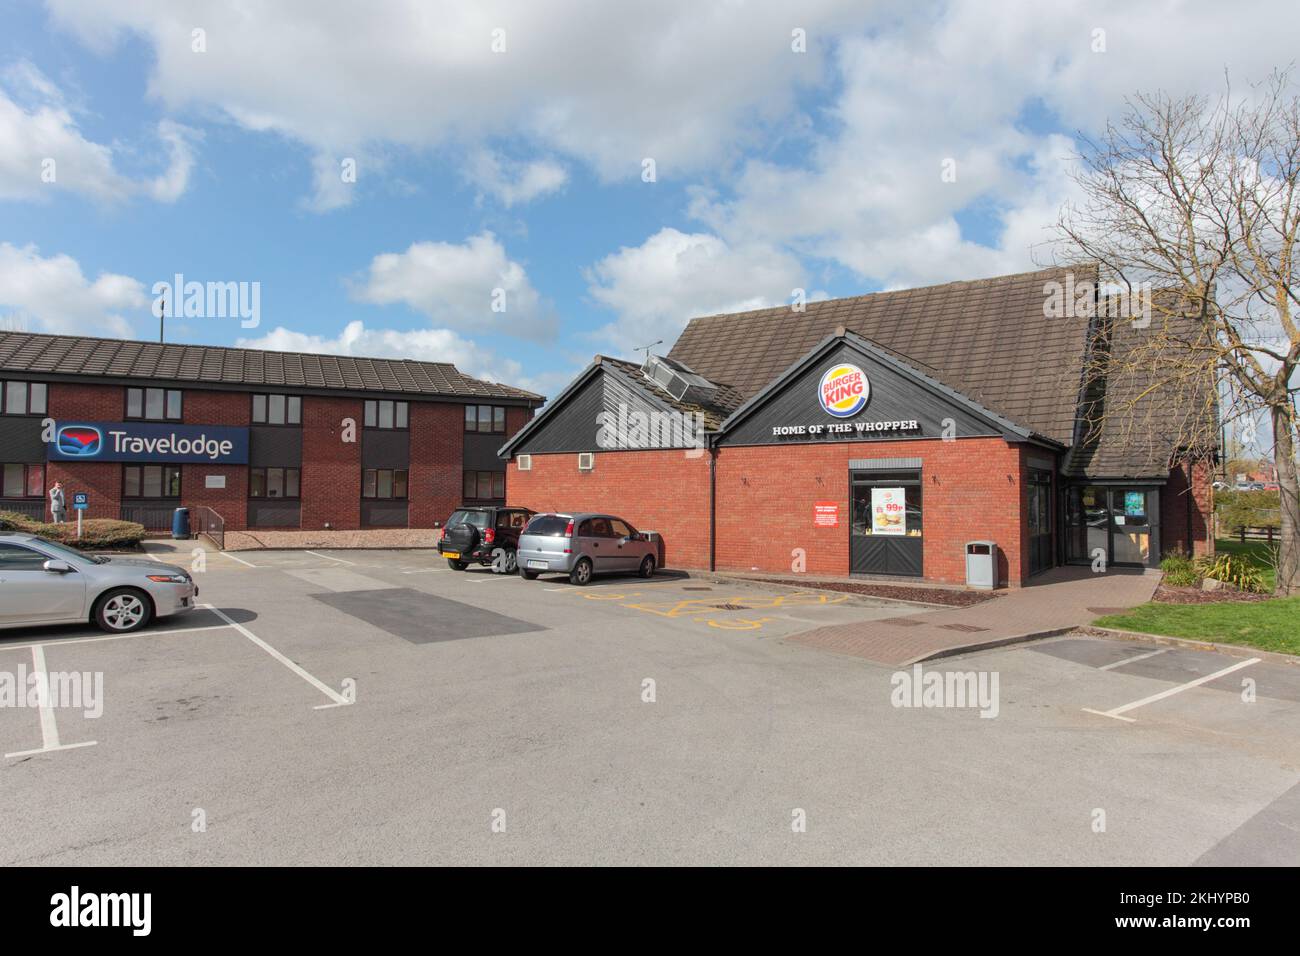 Travelodge/Burger King, Chesterfield Stock Photo